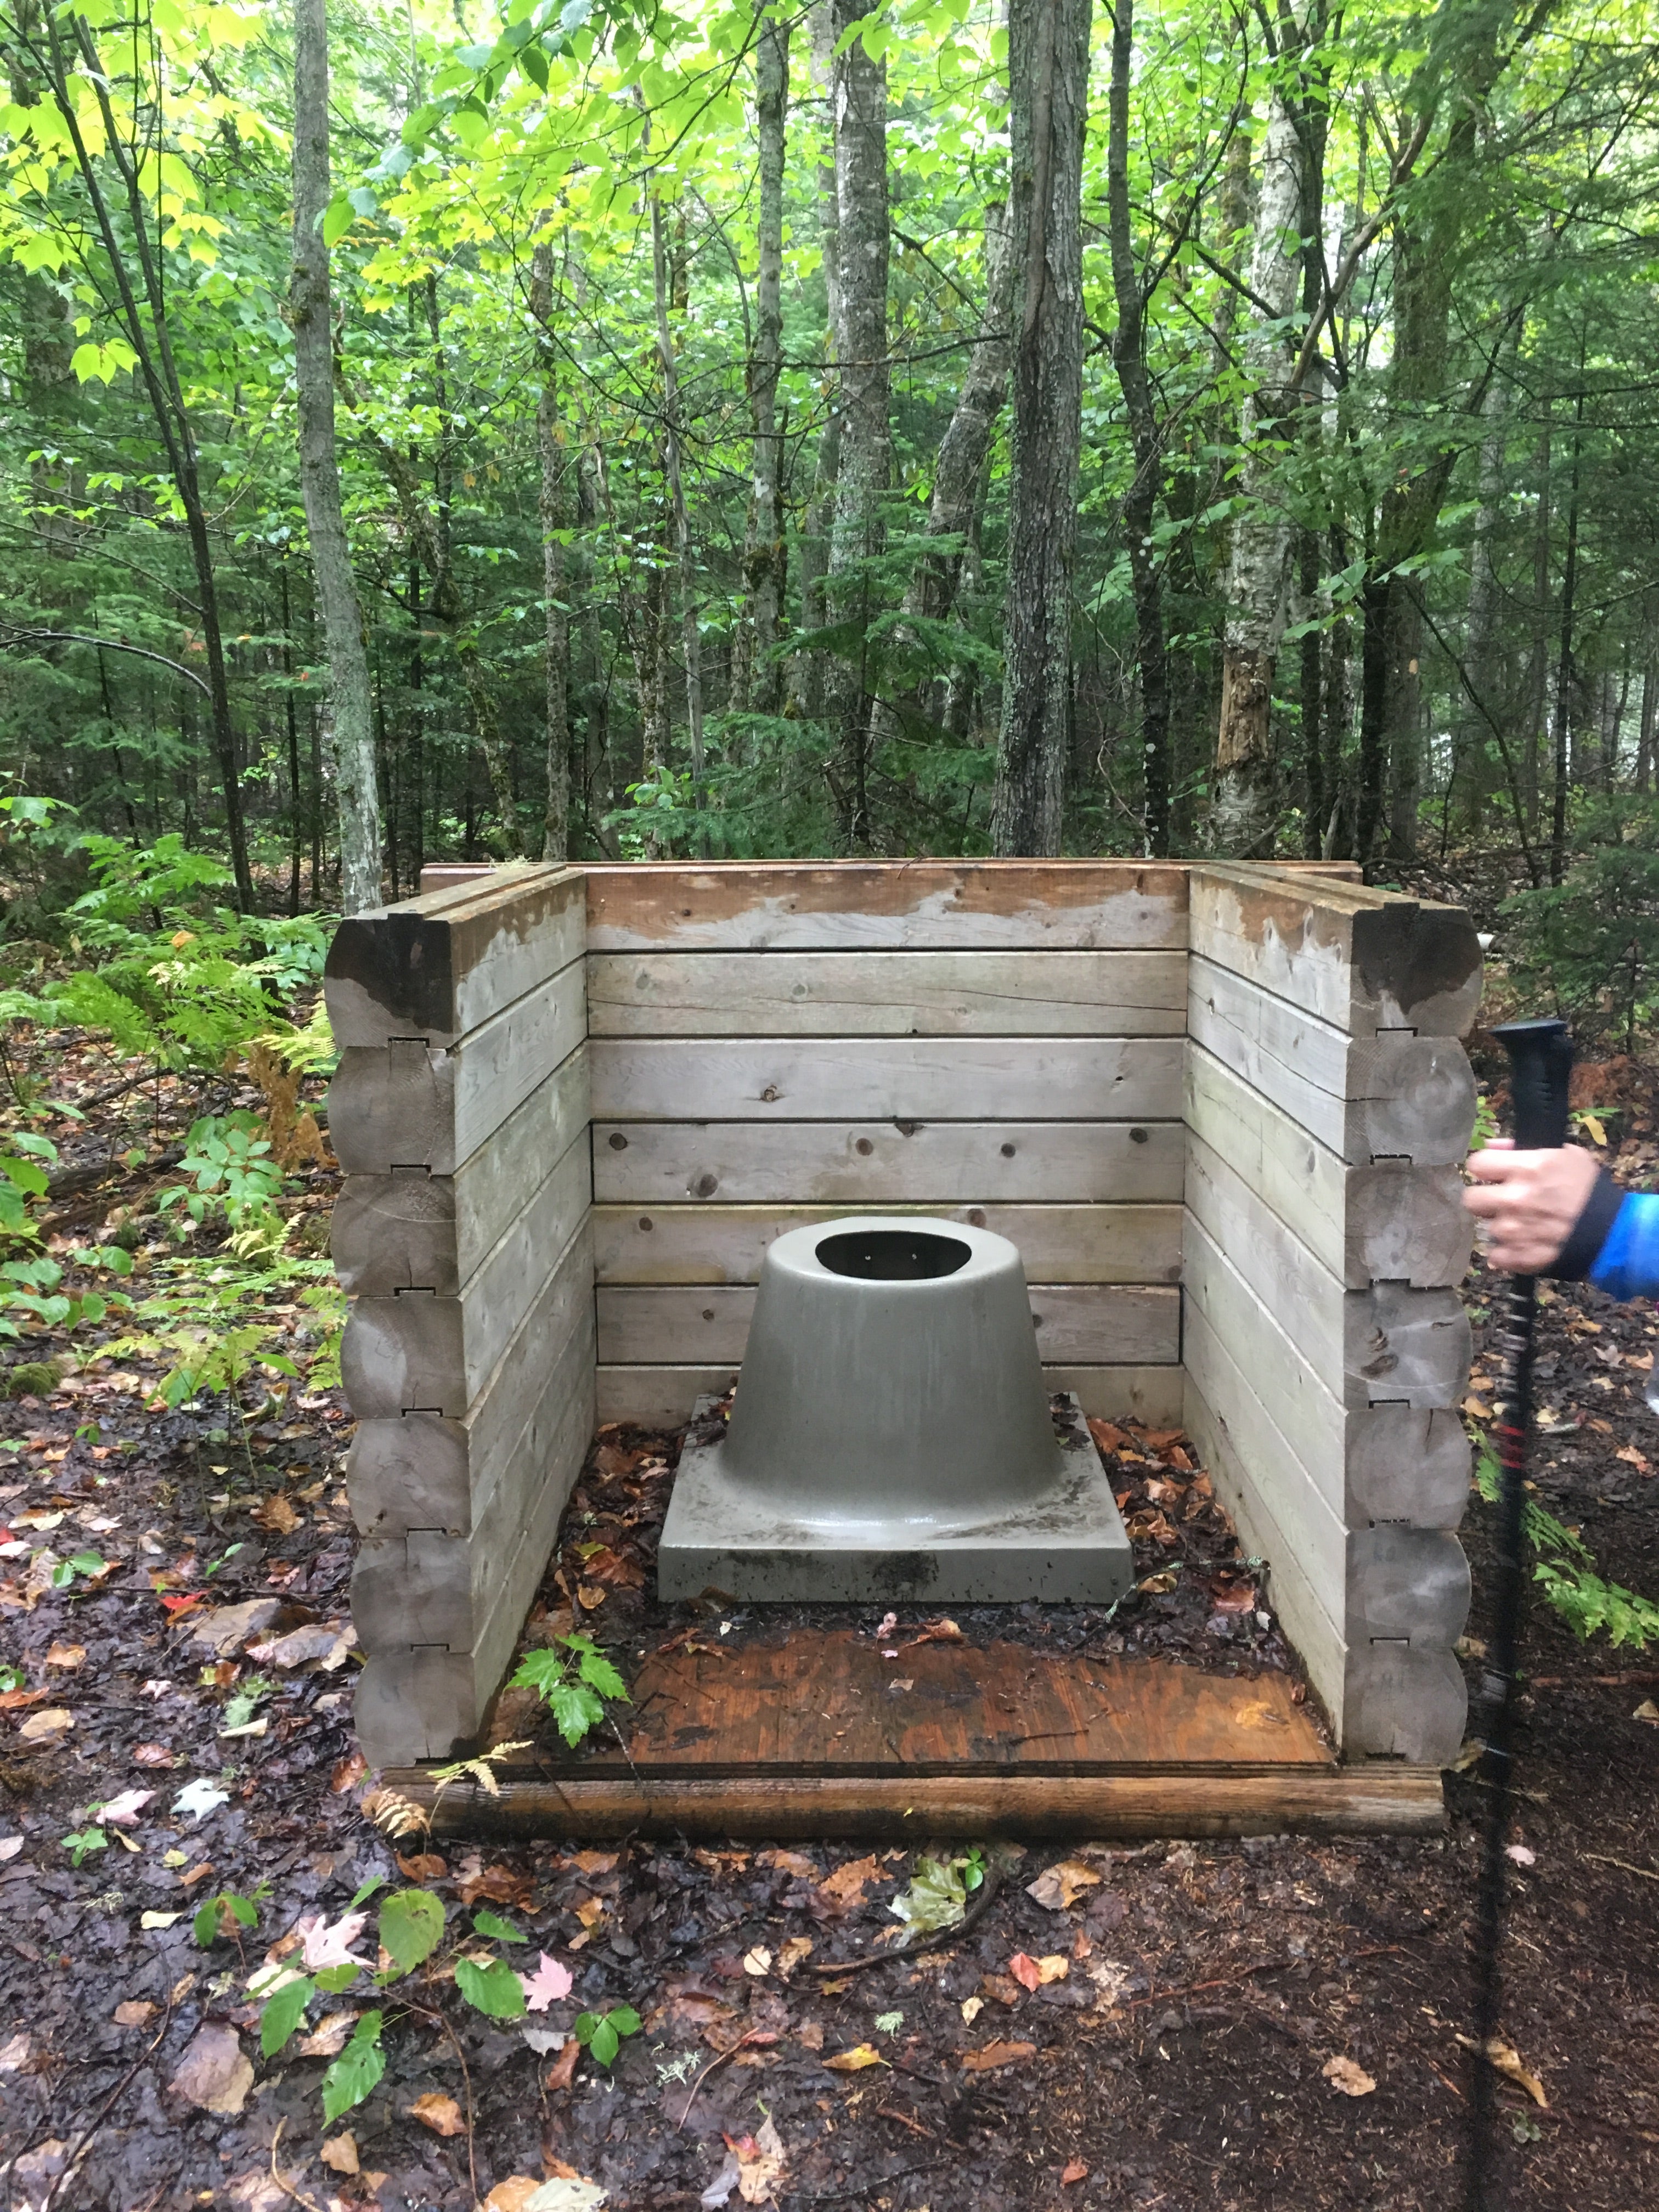 There was an interesting outhouse available for peak campers.